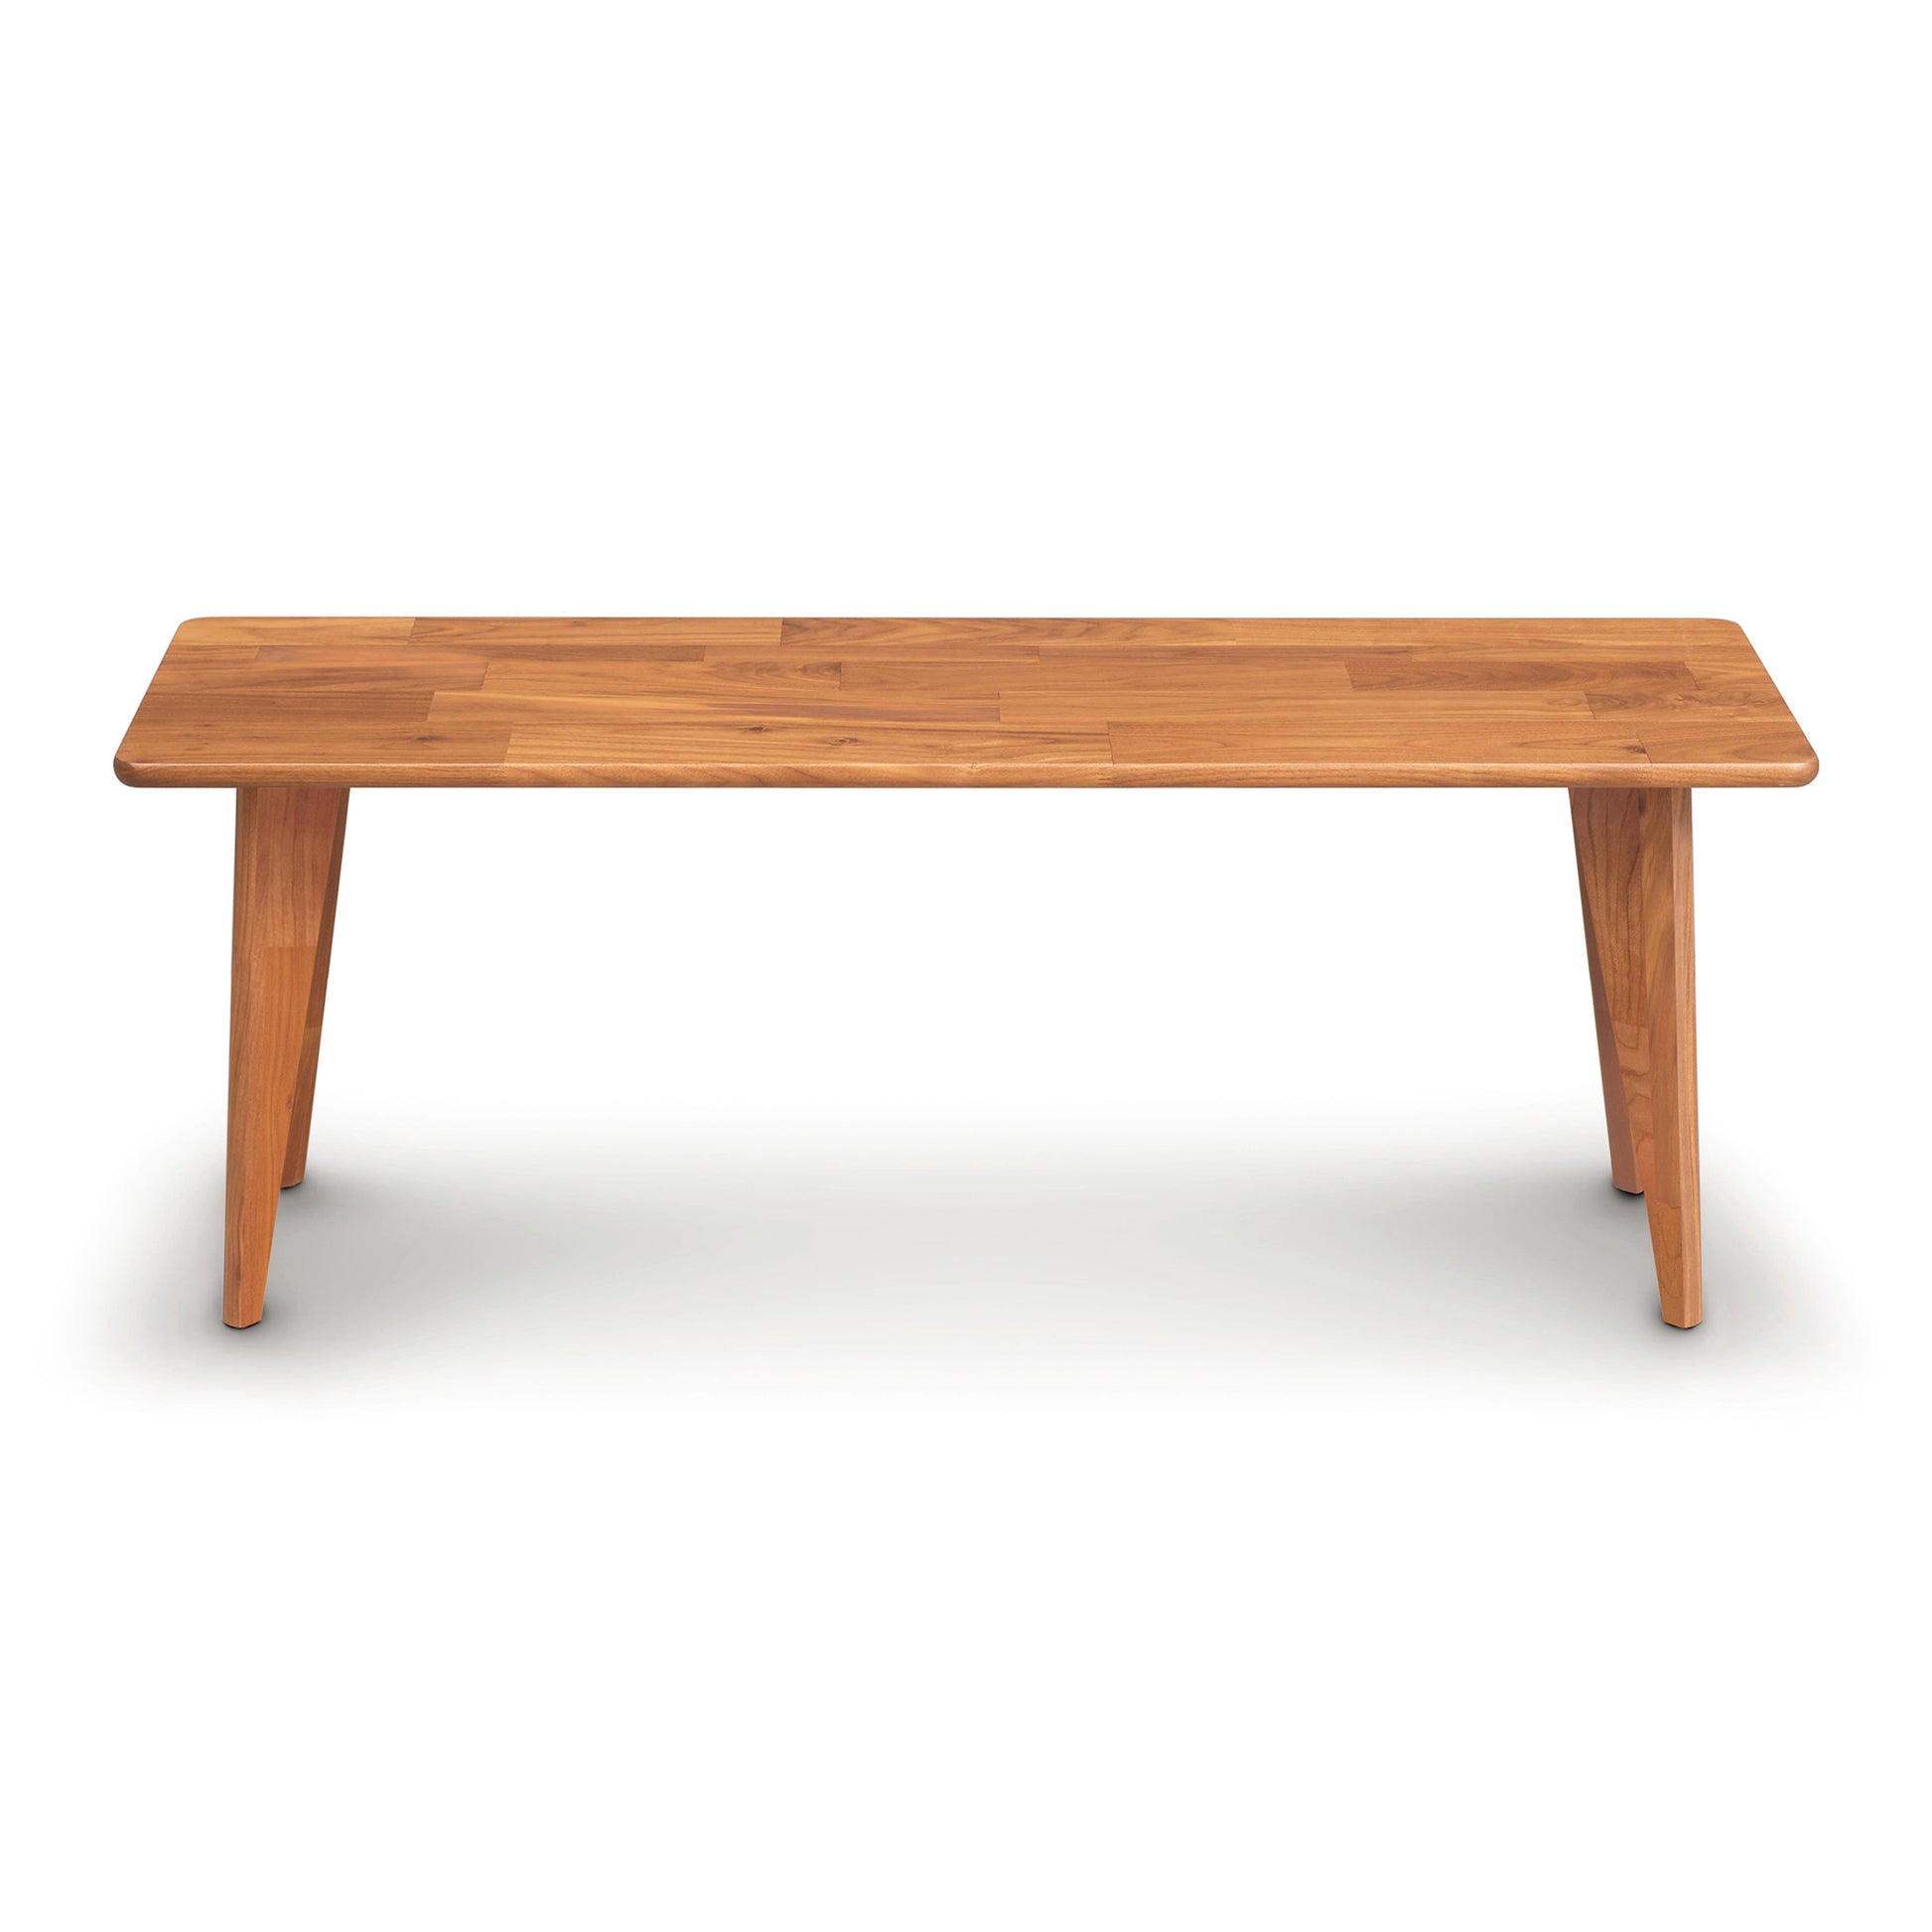 A Copeland Furniture Essentials Bench with Wood Legs with a simple design on a white background.